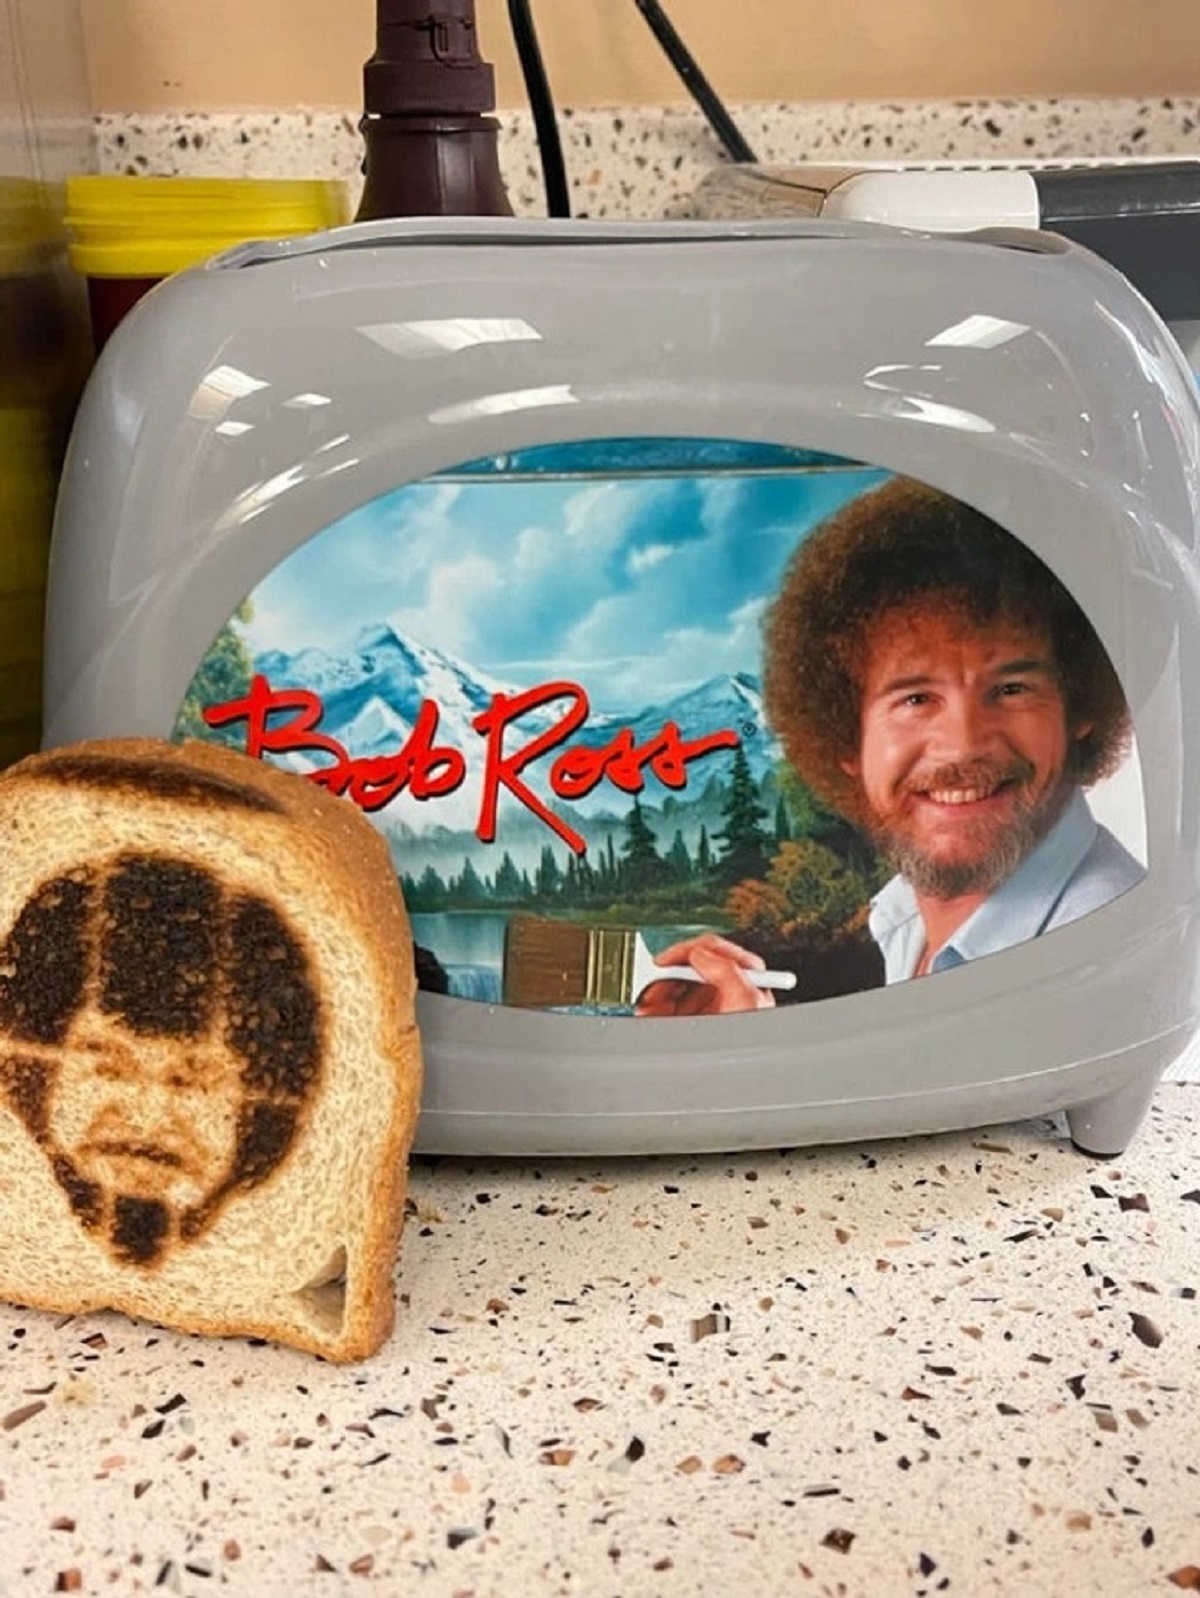 “Someone put a Bob Ross toaster in our breakroom, and it burns an image of Bob Ross onto the toast.”